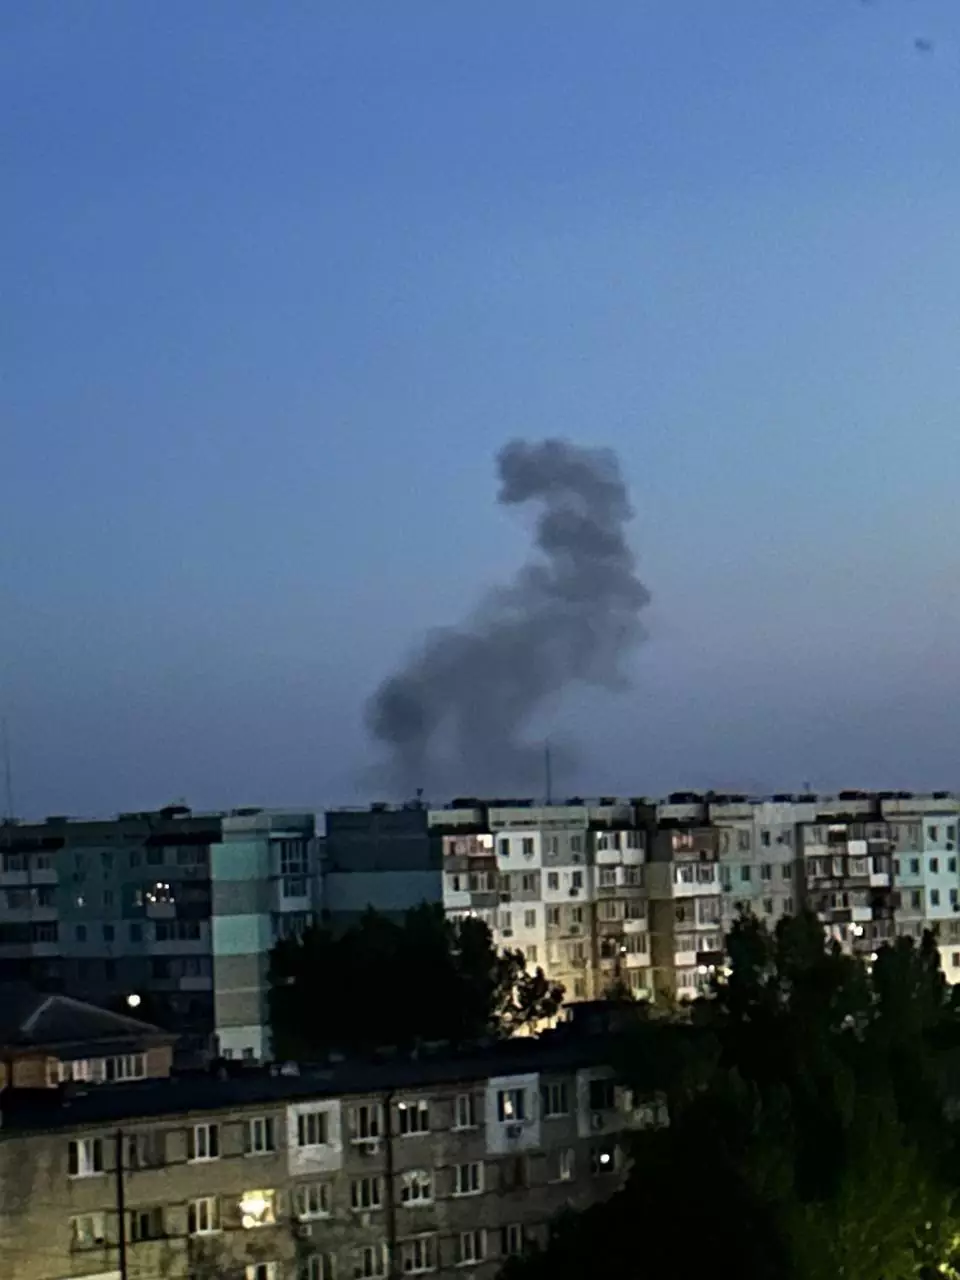 Night explosions occur near Russian HQ in occupied Berdiansk ~~